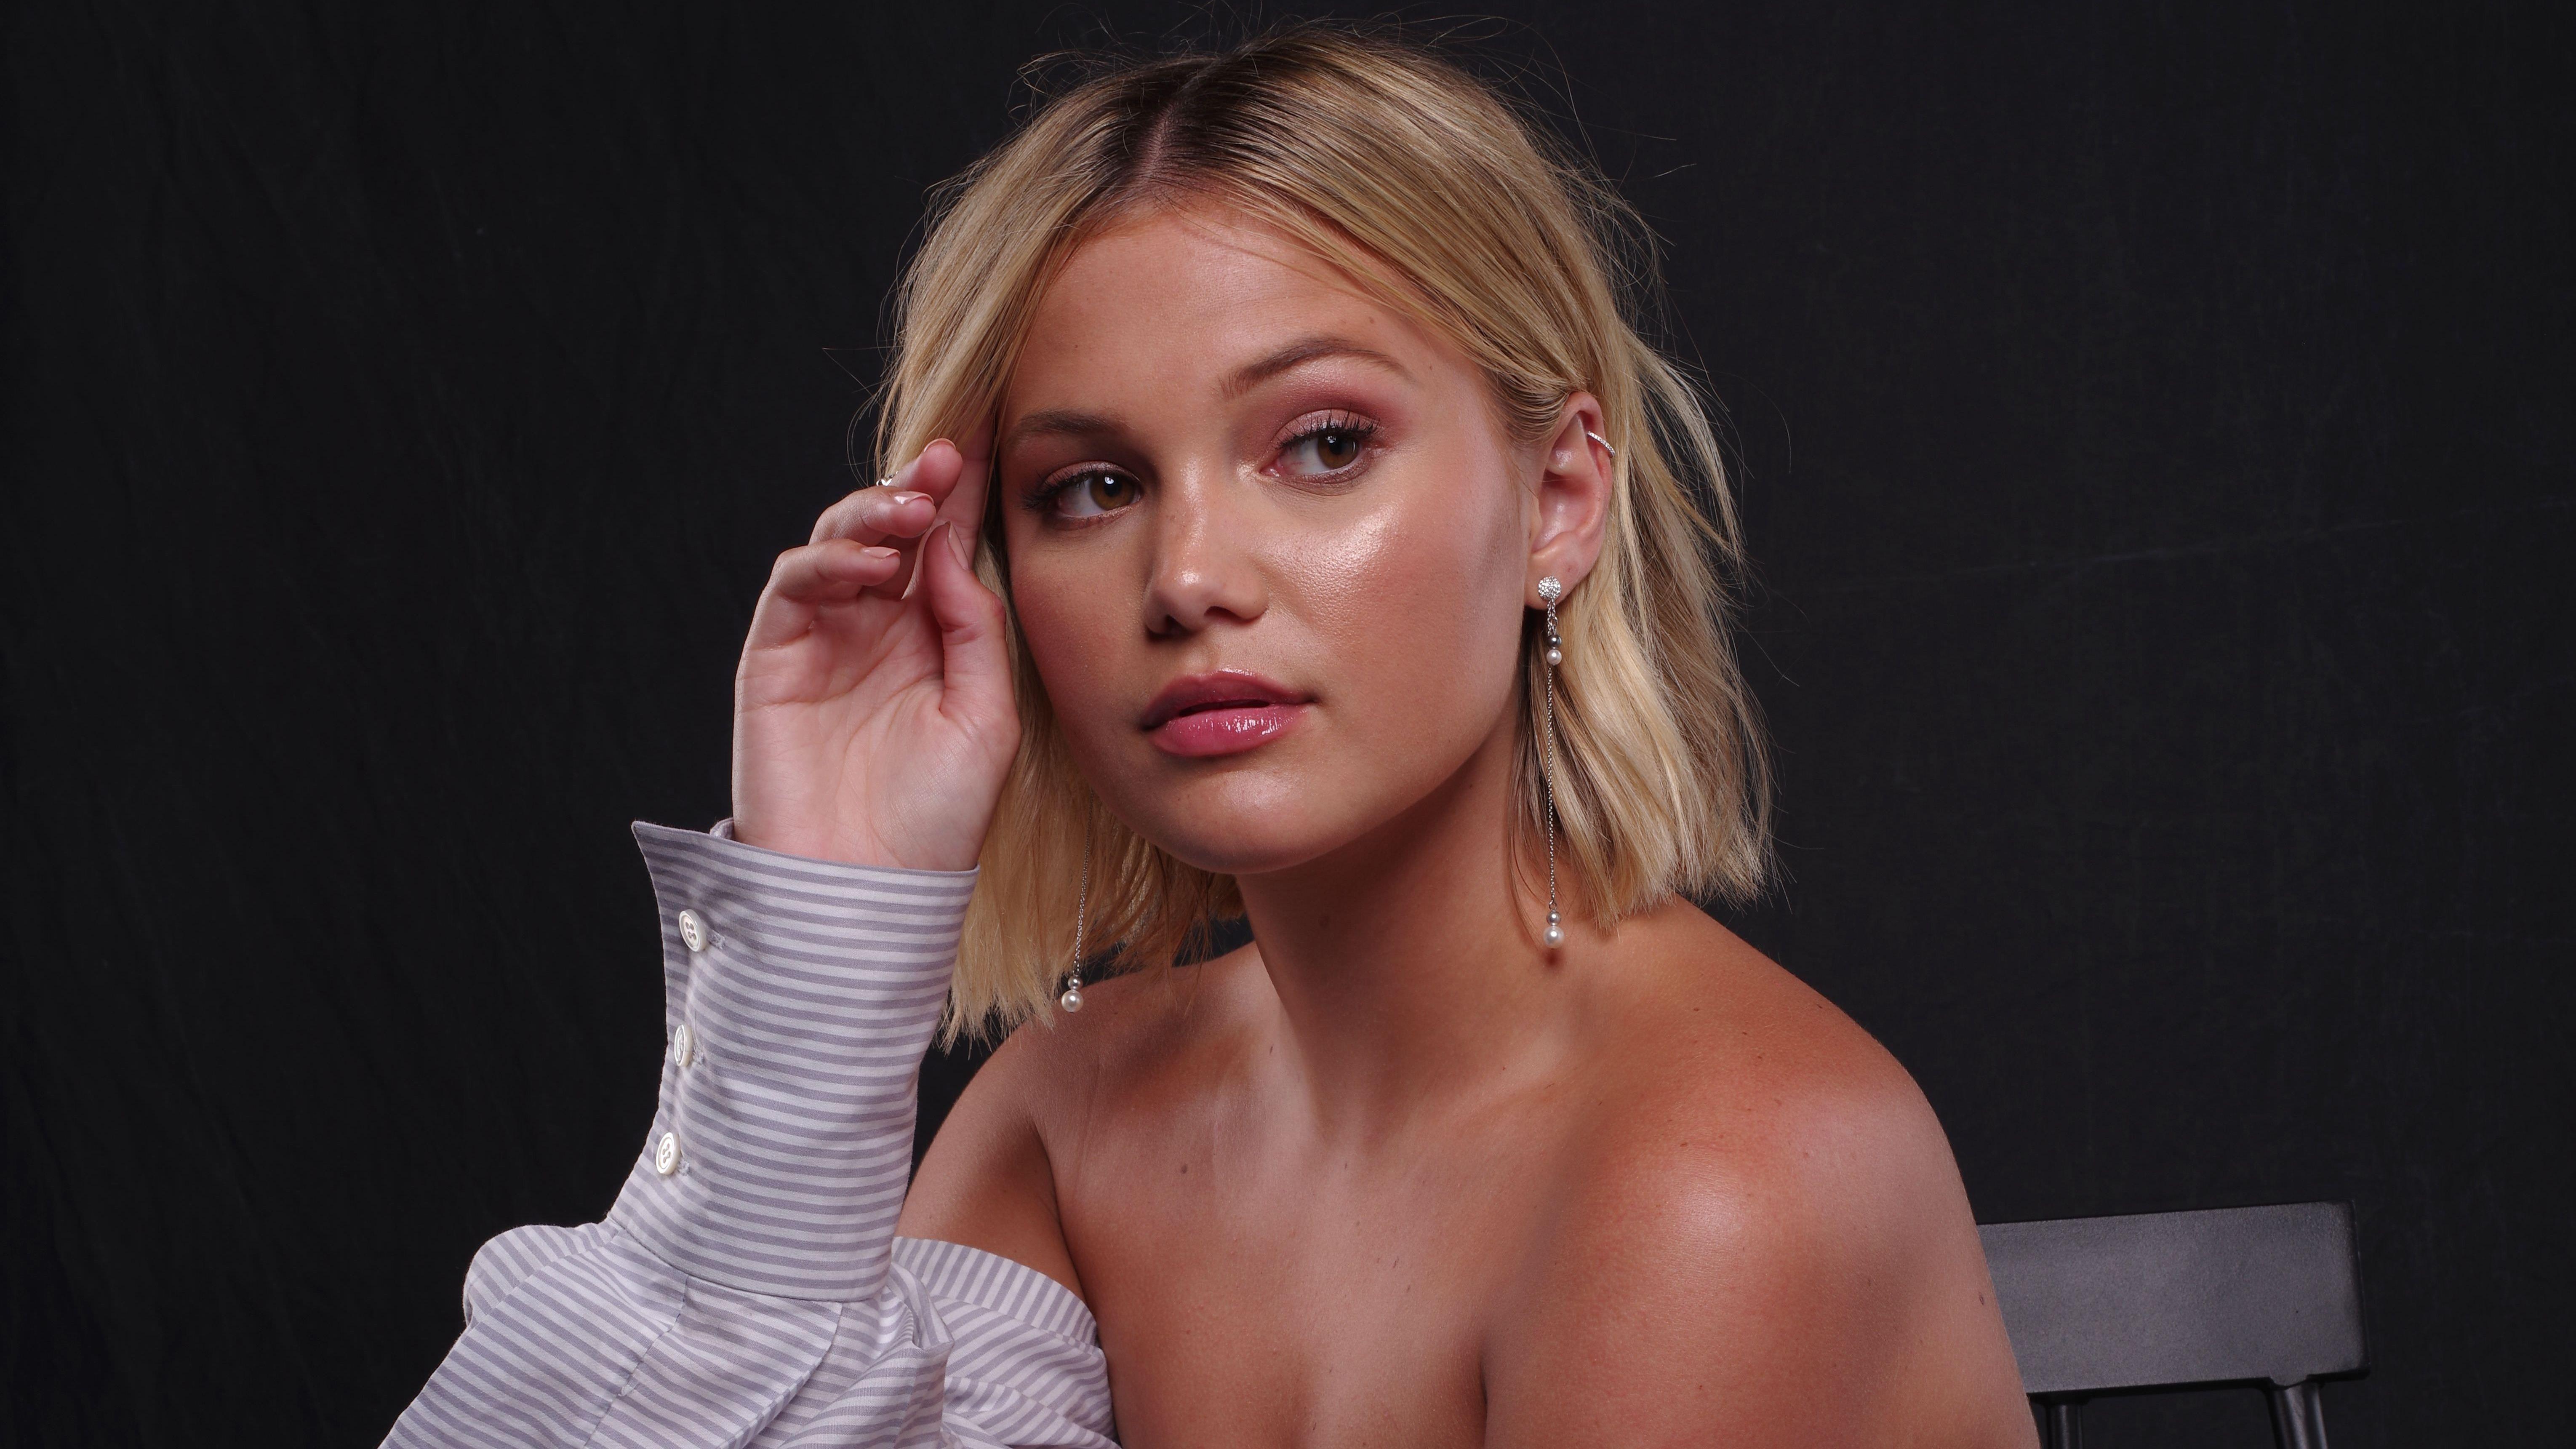 Olivia Holt Wallpapers Top Free Olivia Holt Backgrounds Images, Photos, Reviews